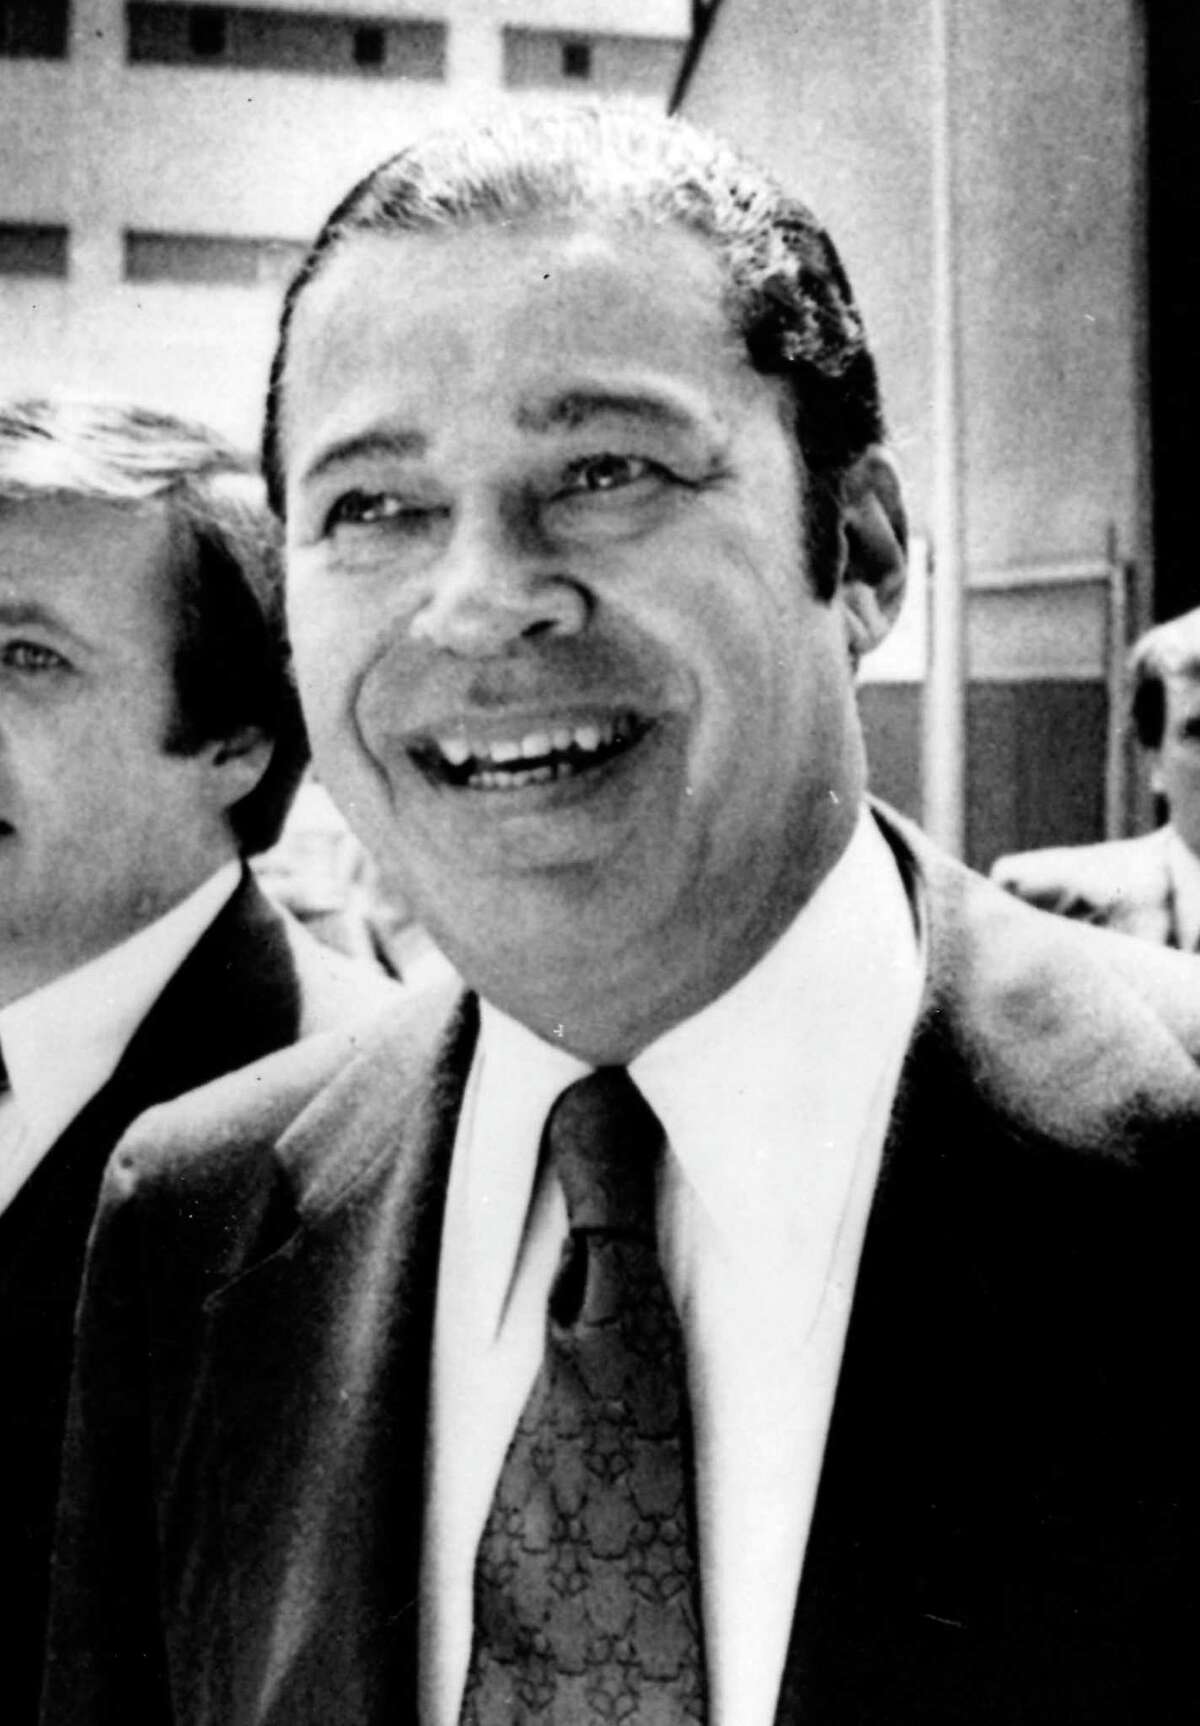 File- In this June 7, 1978 file photo, Sen. Edward W. Brooke, R-Mass., is shown in Cambridge, Mass. Brooke, the first black to win popular election to the Senate, has died. He was 95. Ralph Neas, a former aide, said Brooke died Saturday, Jan. 3, 2015, of natural causes at his Coral Gables, Fla, home. (AP Photo/file)